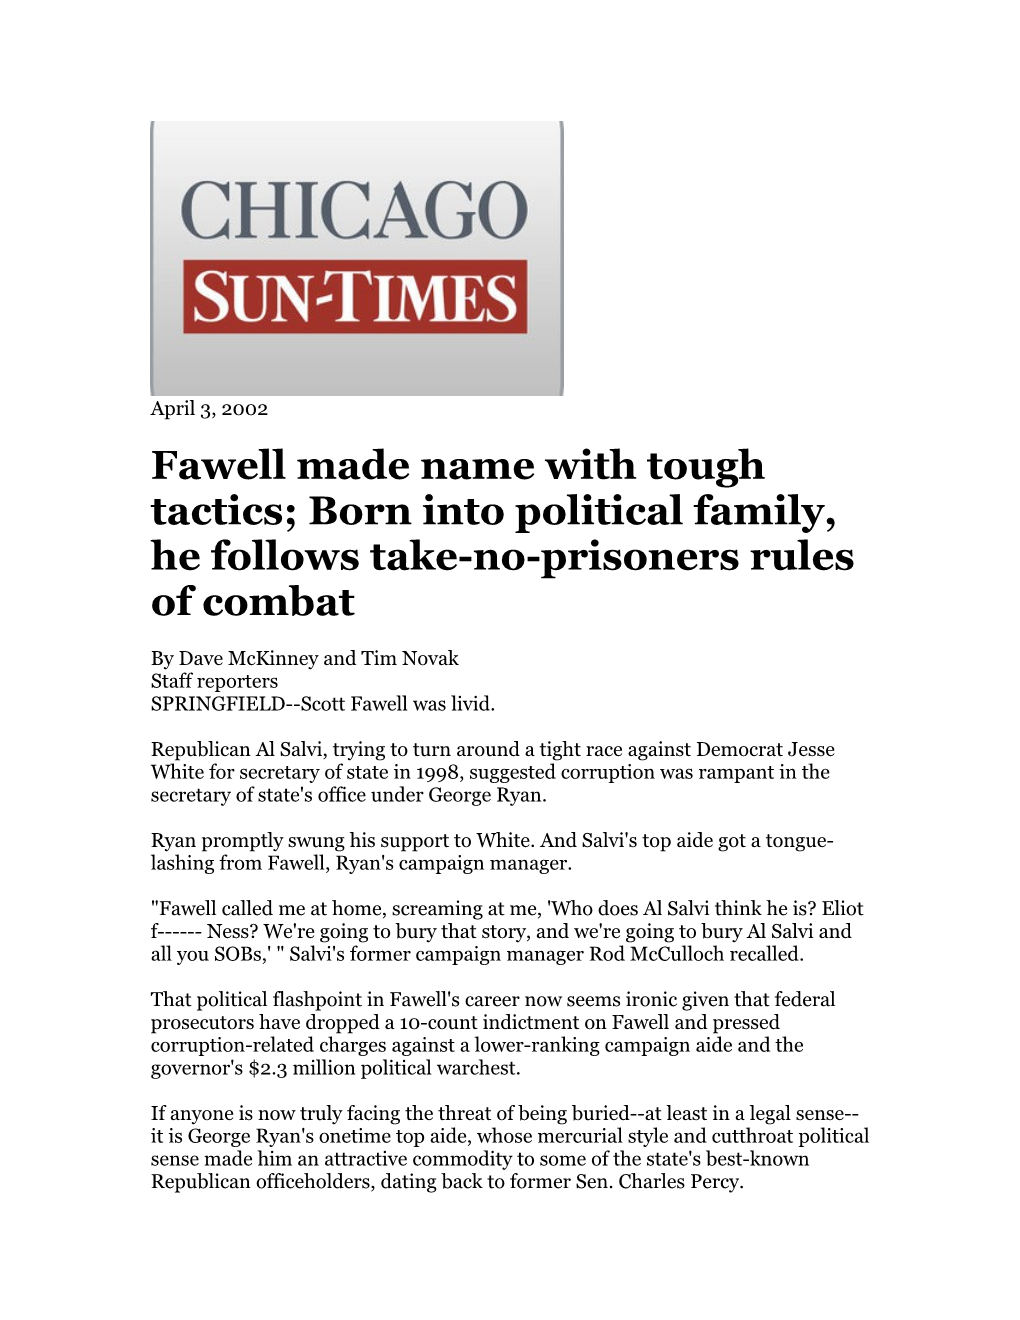 Fawell Made Name with Tough Tactics; Born Into Political Family, He Follows Take-No-Prisoners